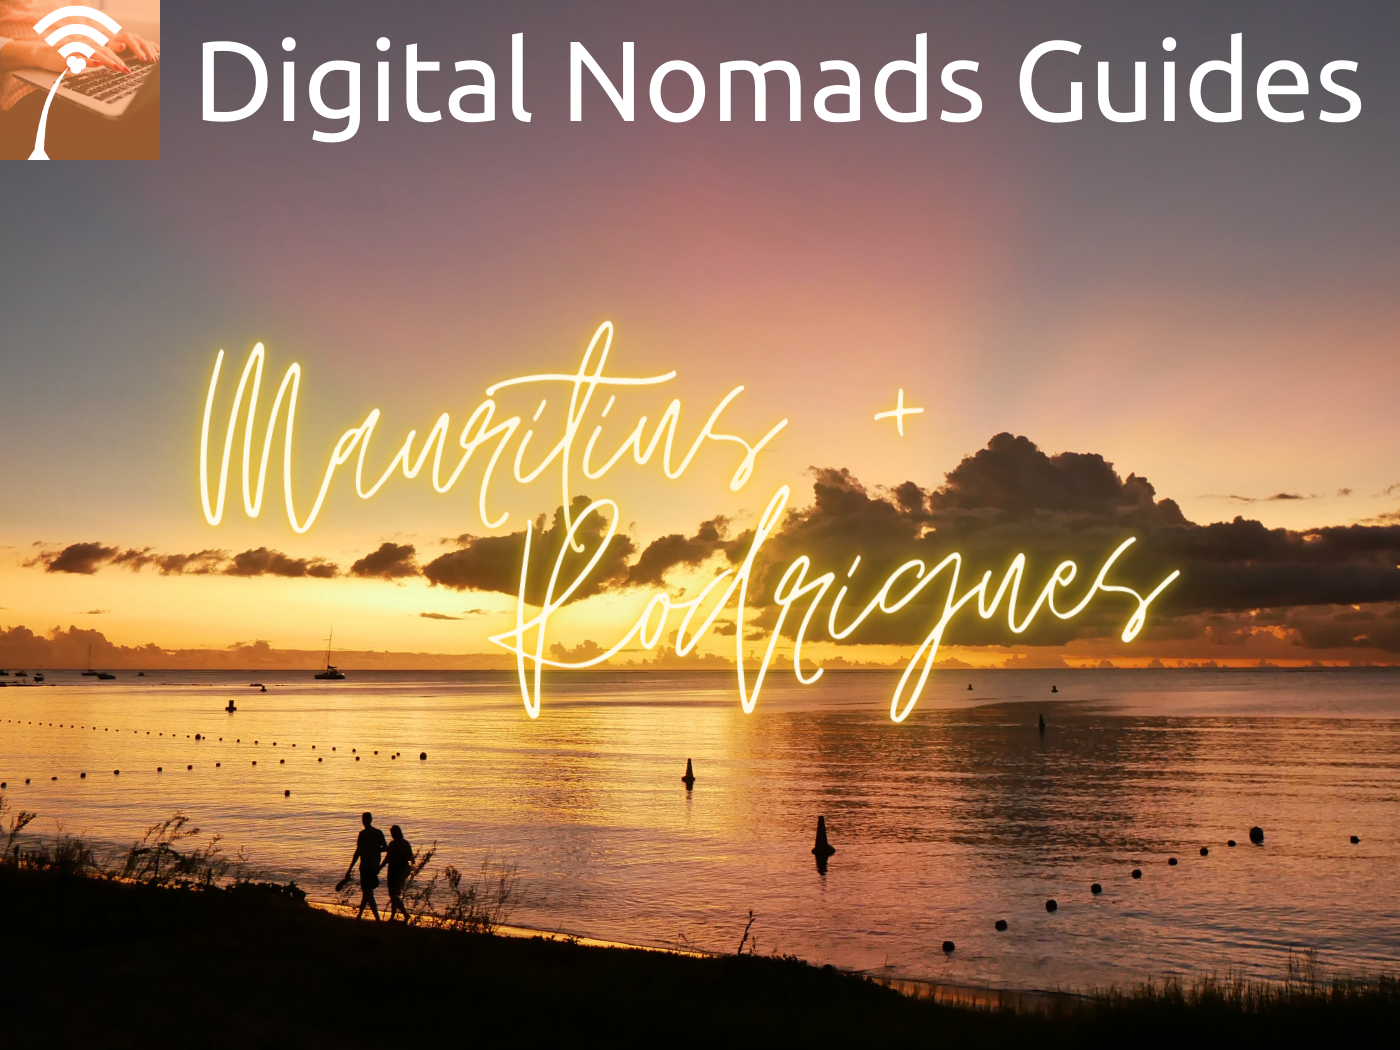 Digital nomads guides guide to Mauritius and Rodrigues island remote work Mont Choisy beach sunset